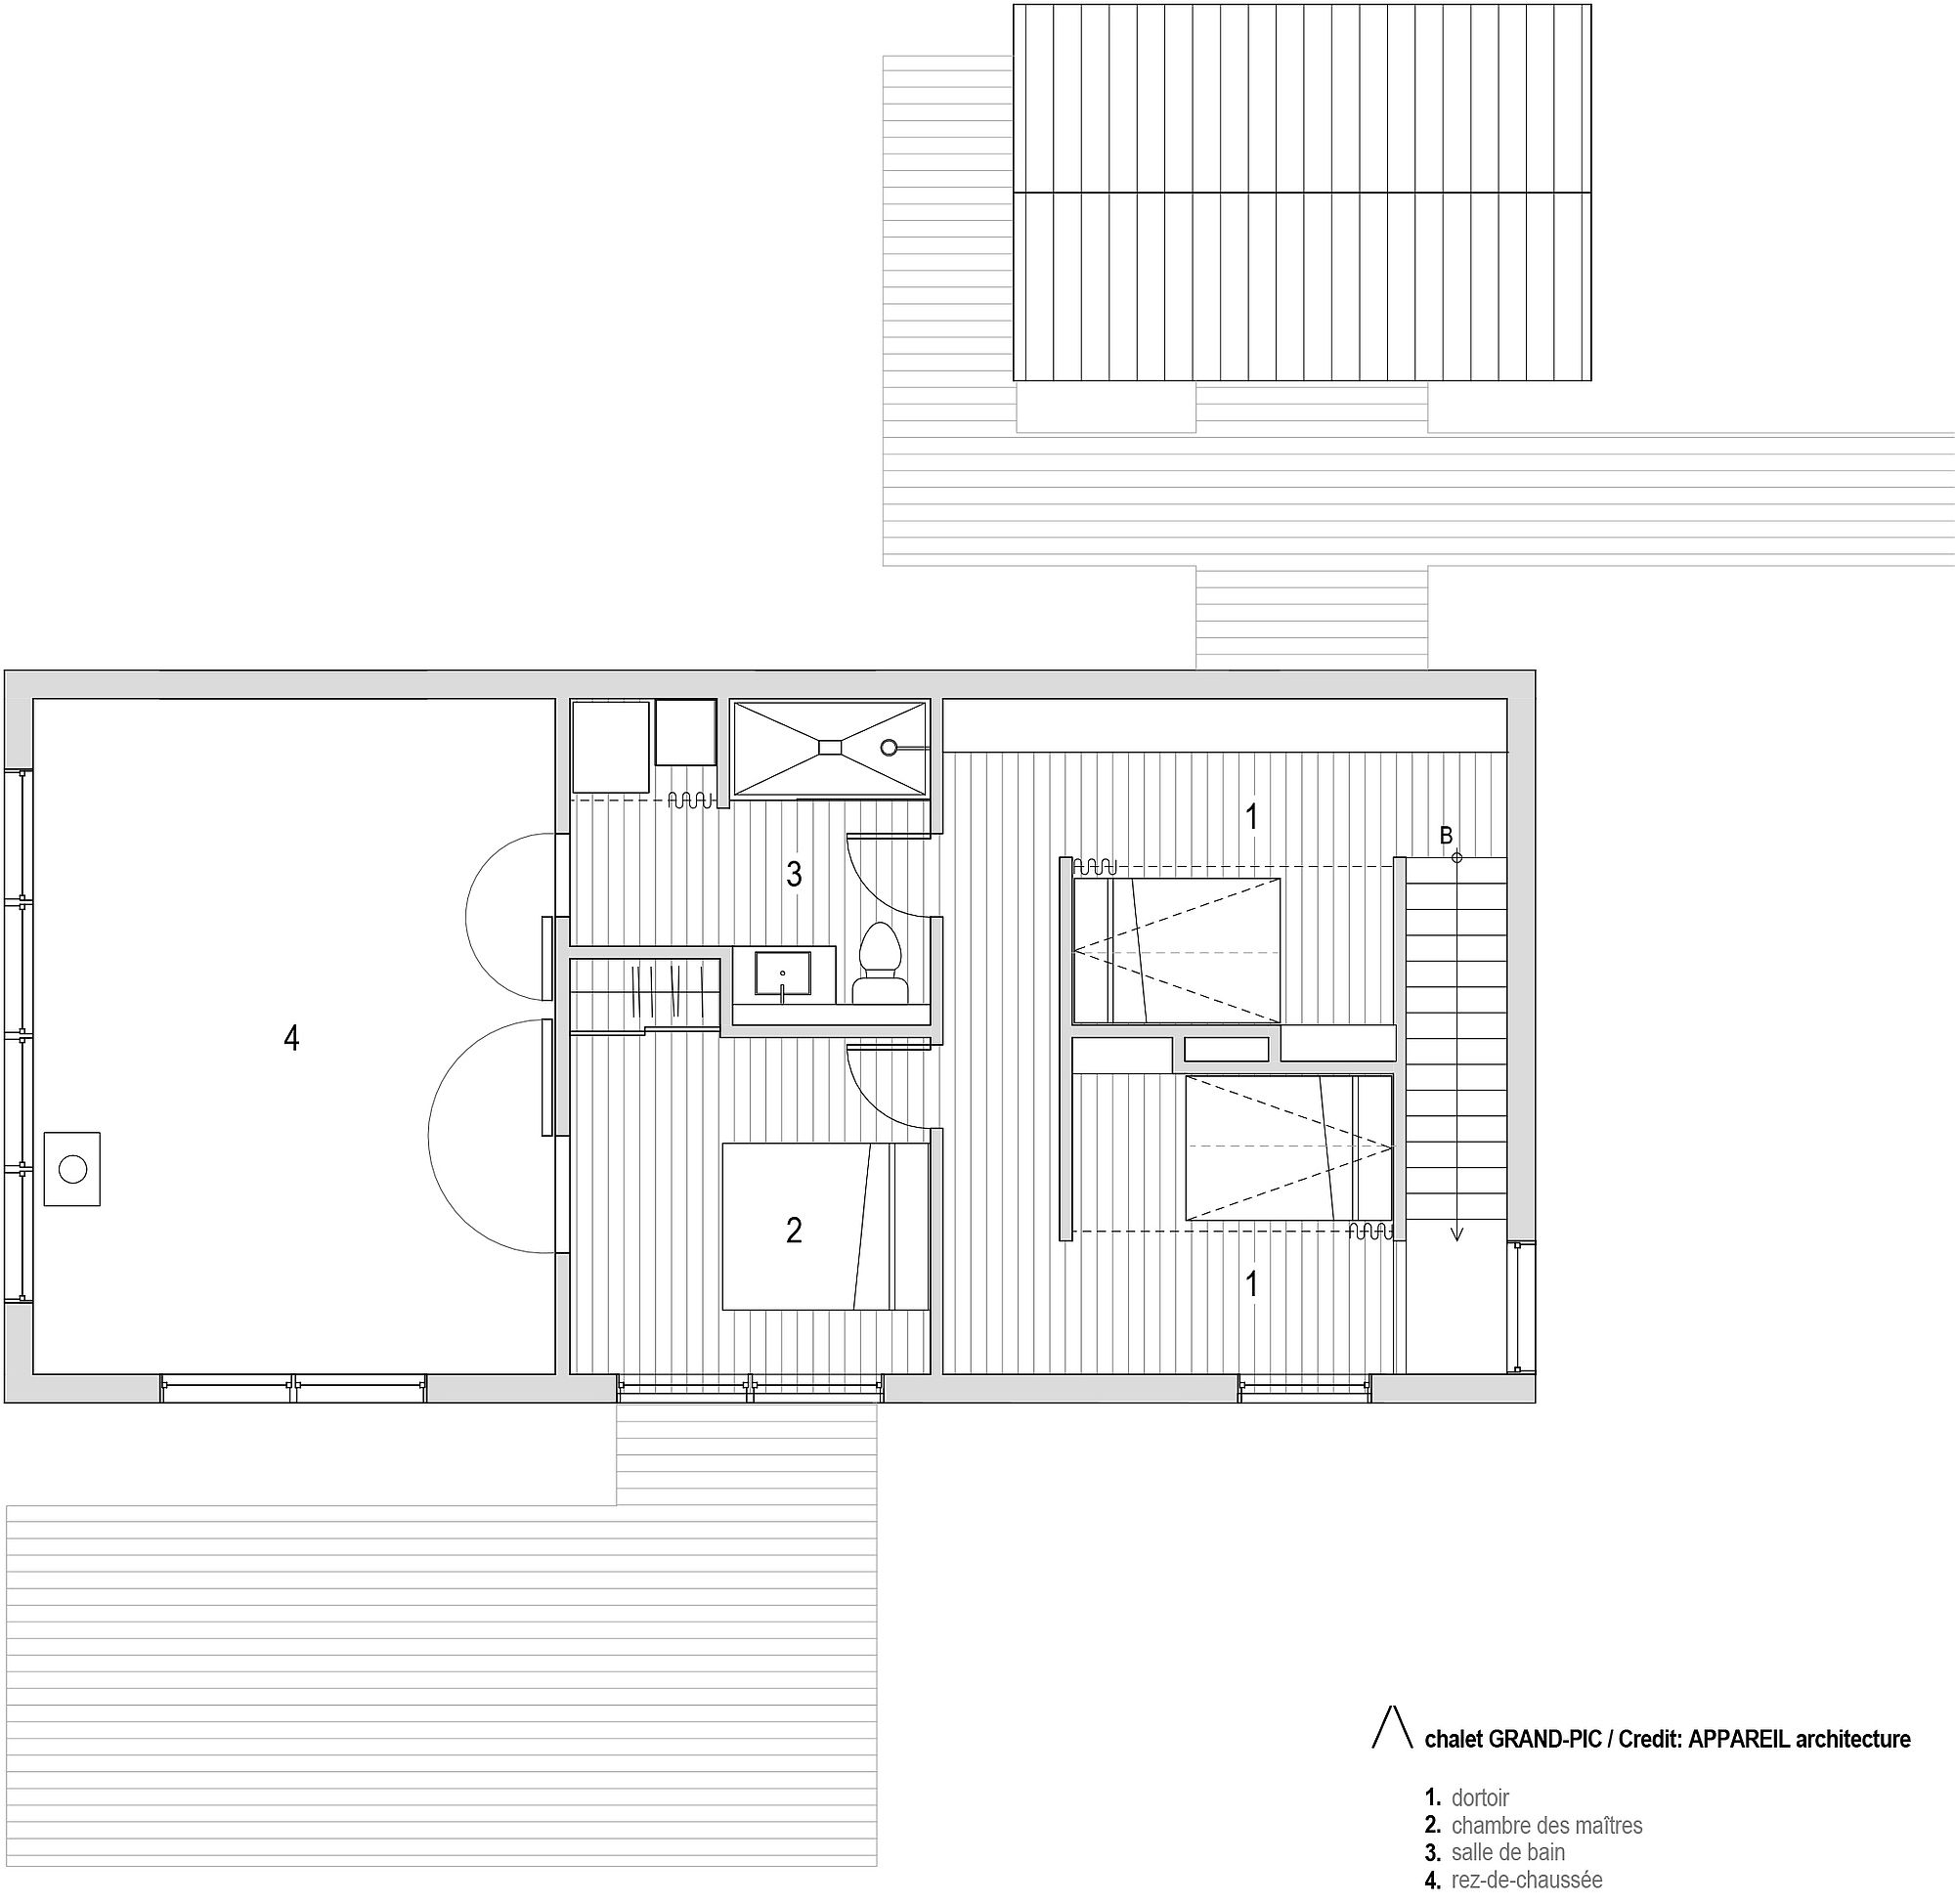 Second level floor plan of Grand-Pic Chalet